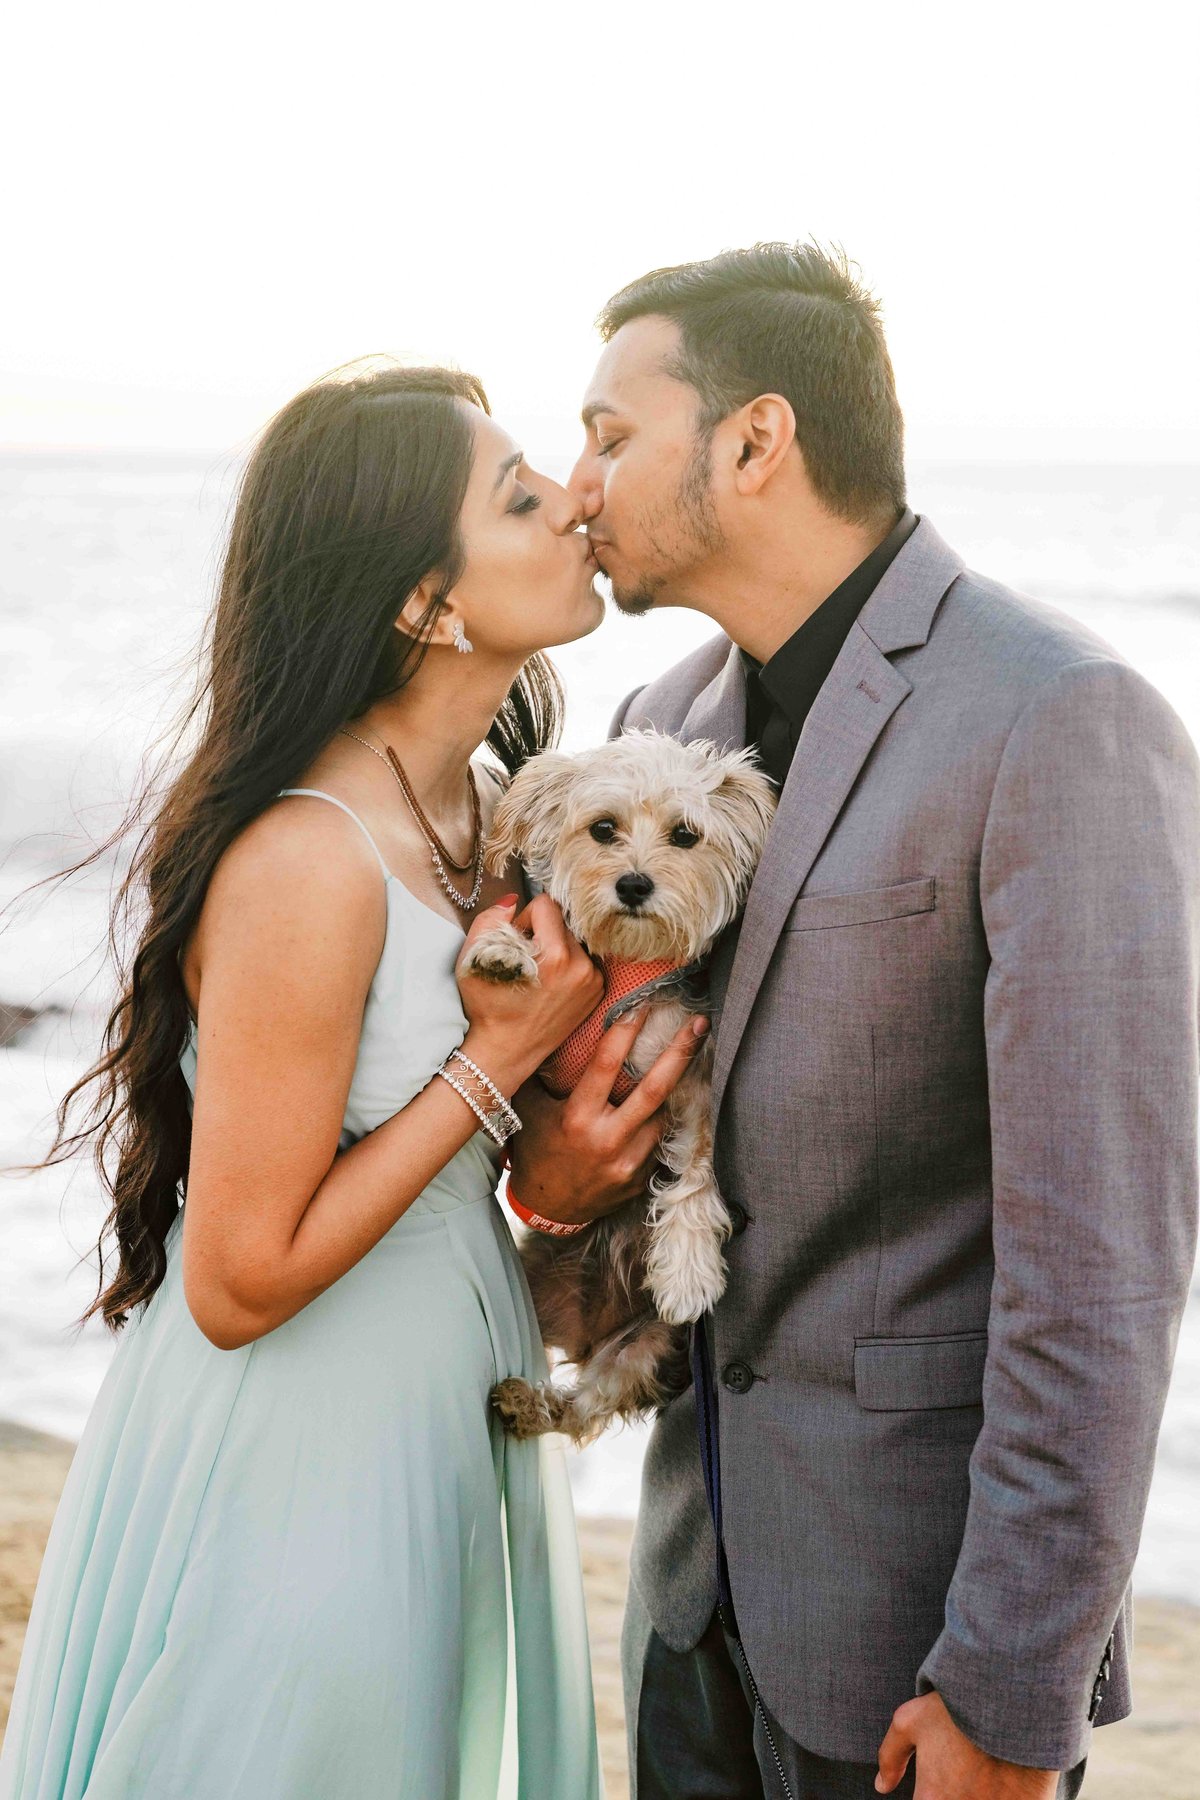 Babsie-Ly-Photography-San-Diego-Proposal-Engagement-Sunset-Cliffs-Indian-Couple-Dog-Surprise-005